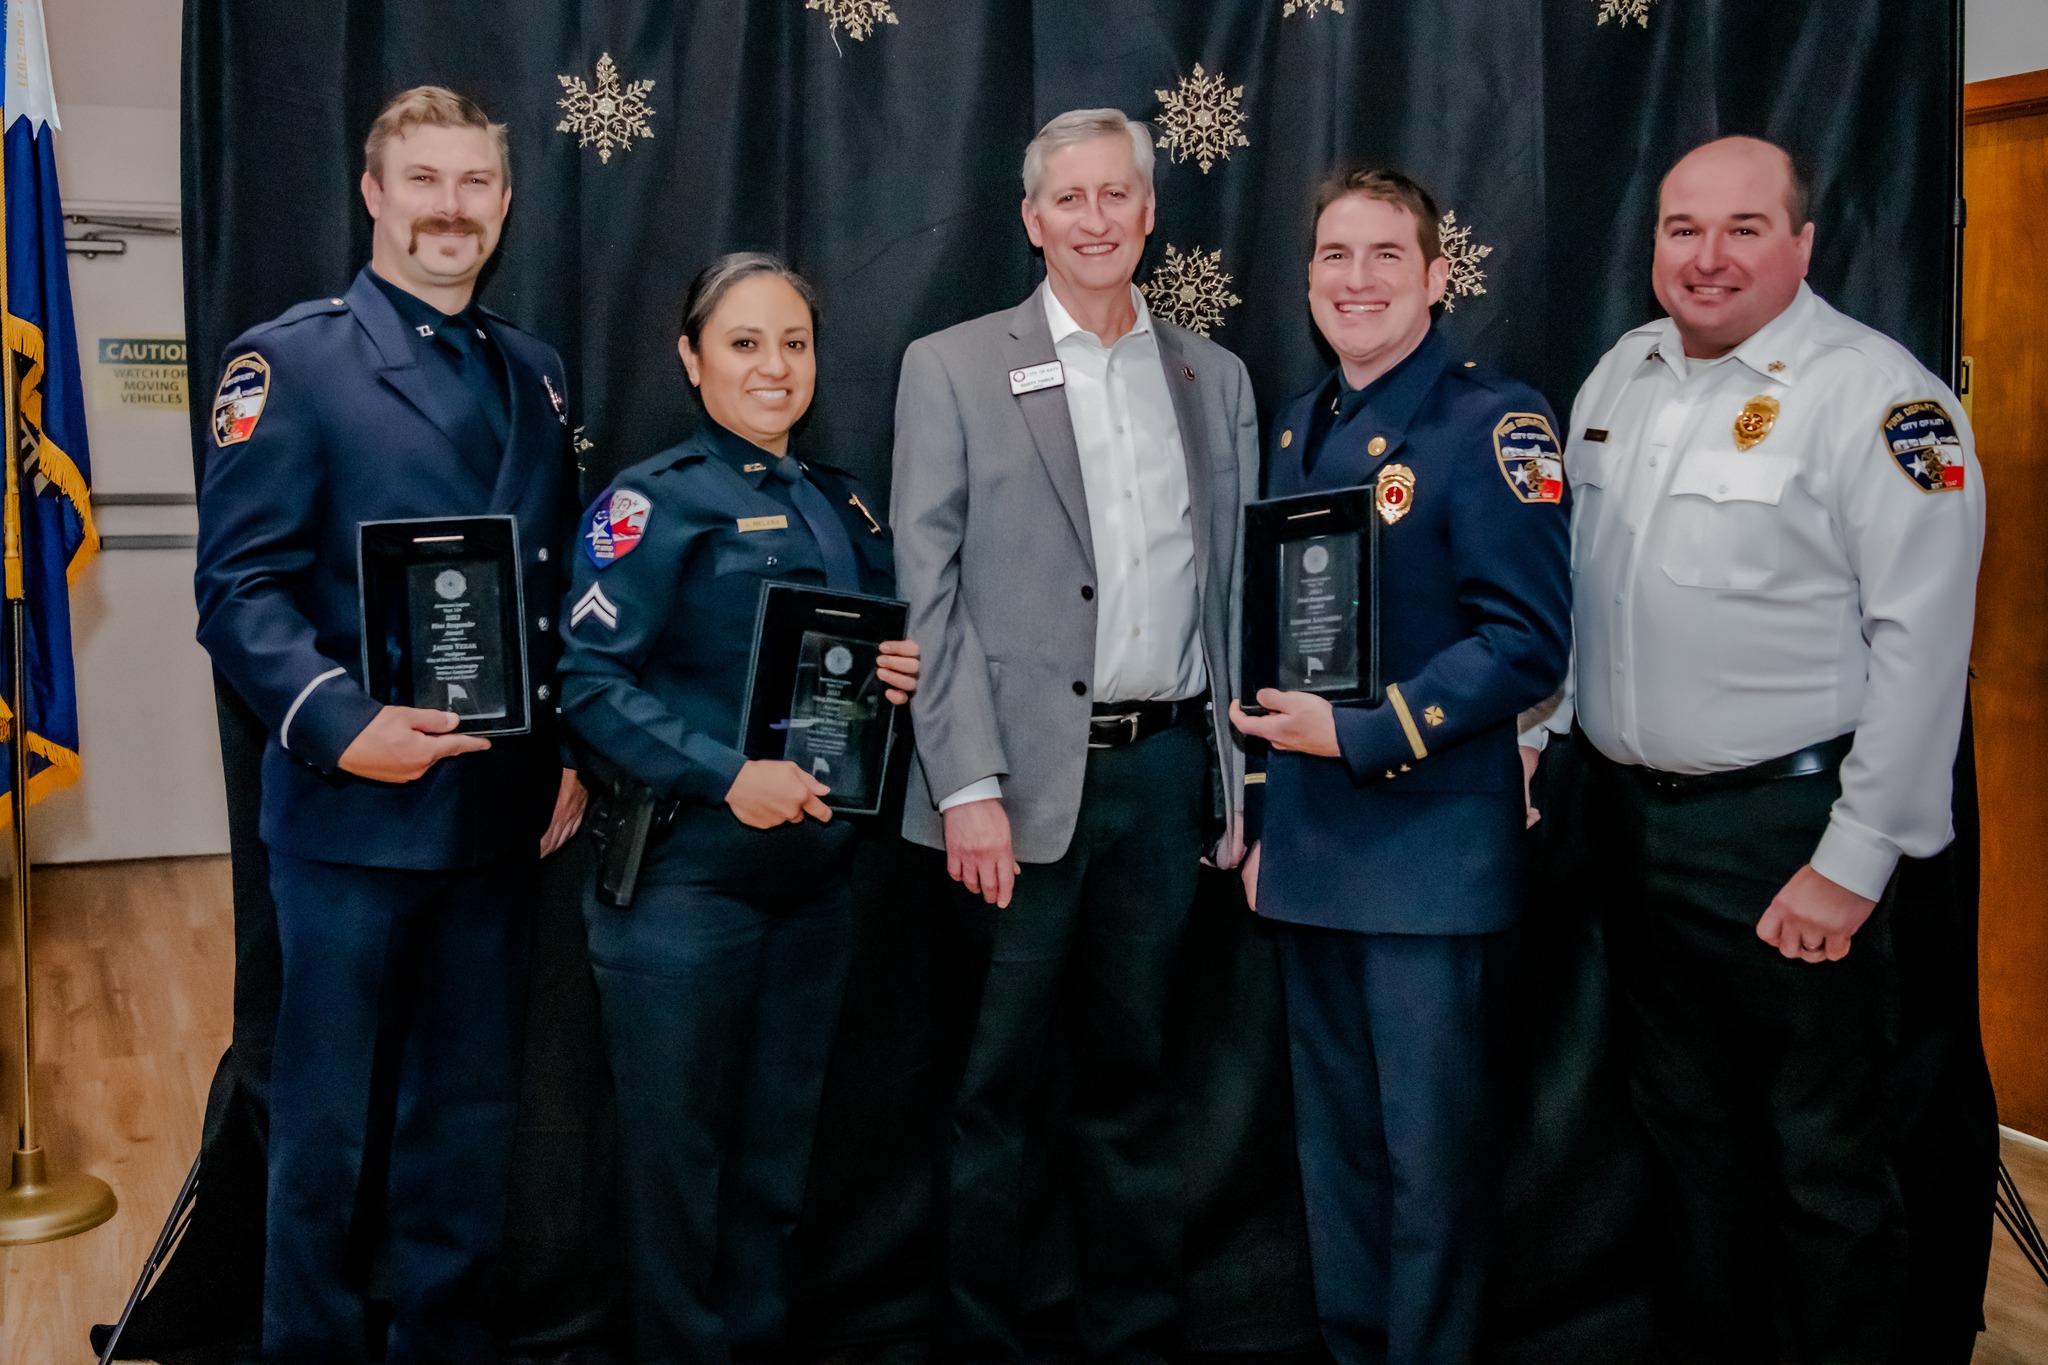 First Responders Honored at Katy First Responders Dinner